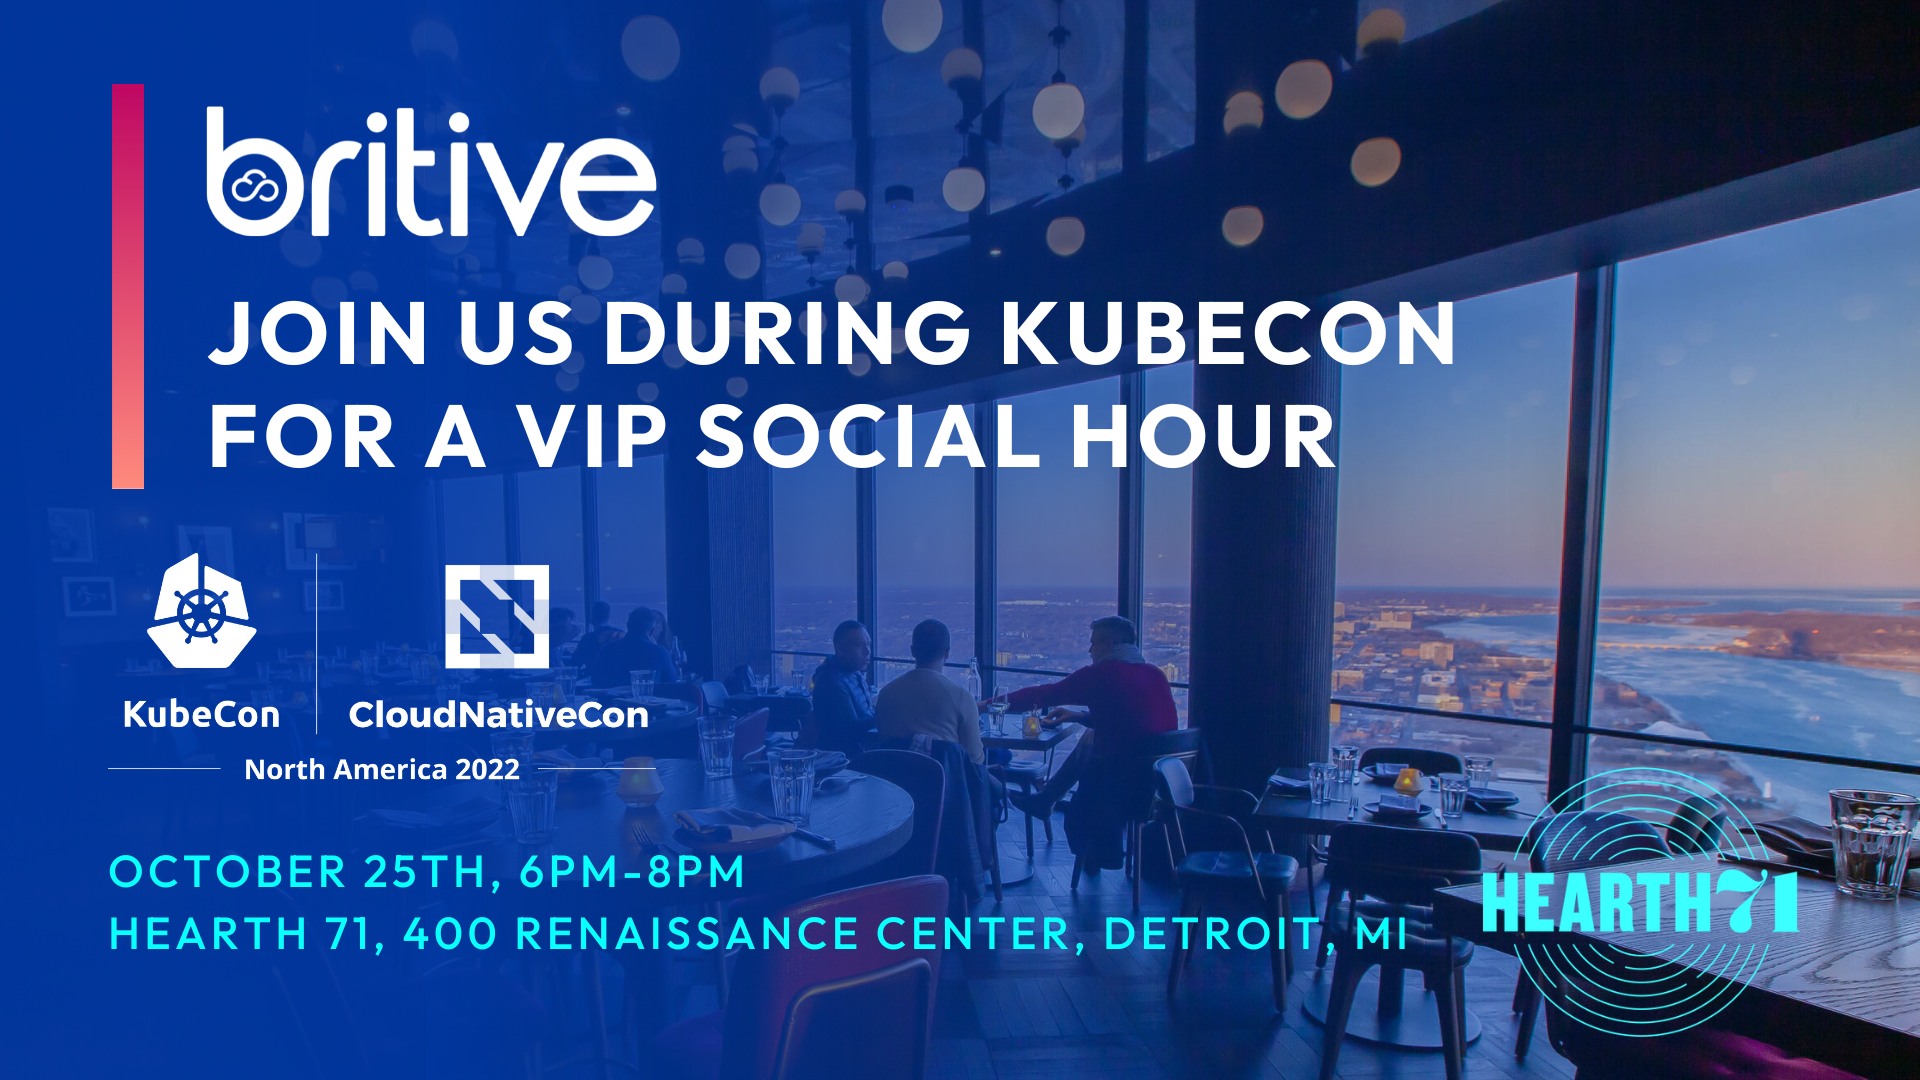 Britive Social Hour at KubeCon 2022